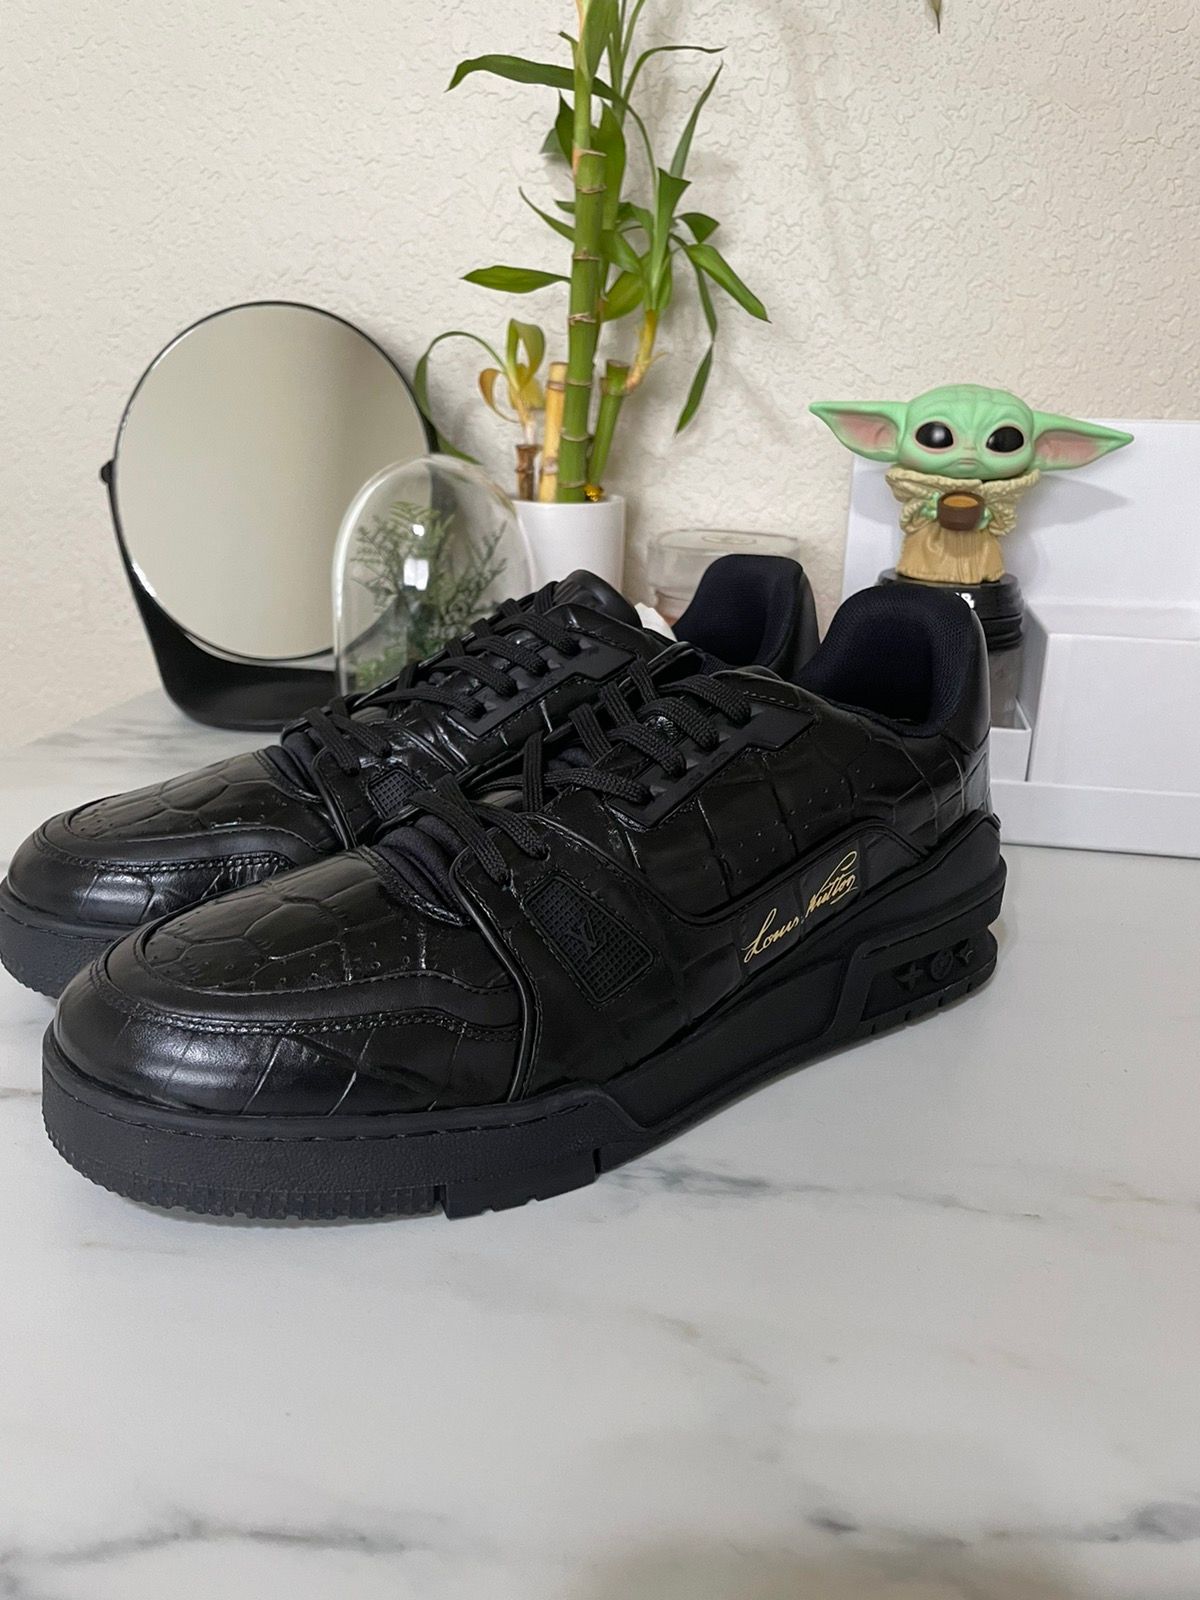 Lv trainer cloth low trainers Louis Vuitton Black size 42 EU in